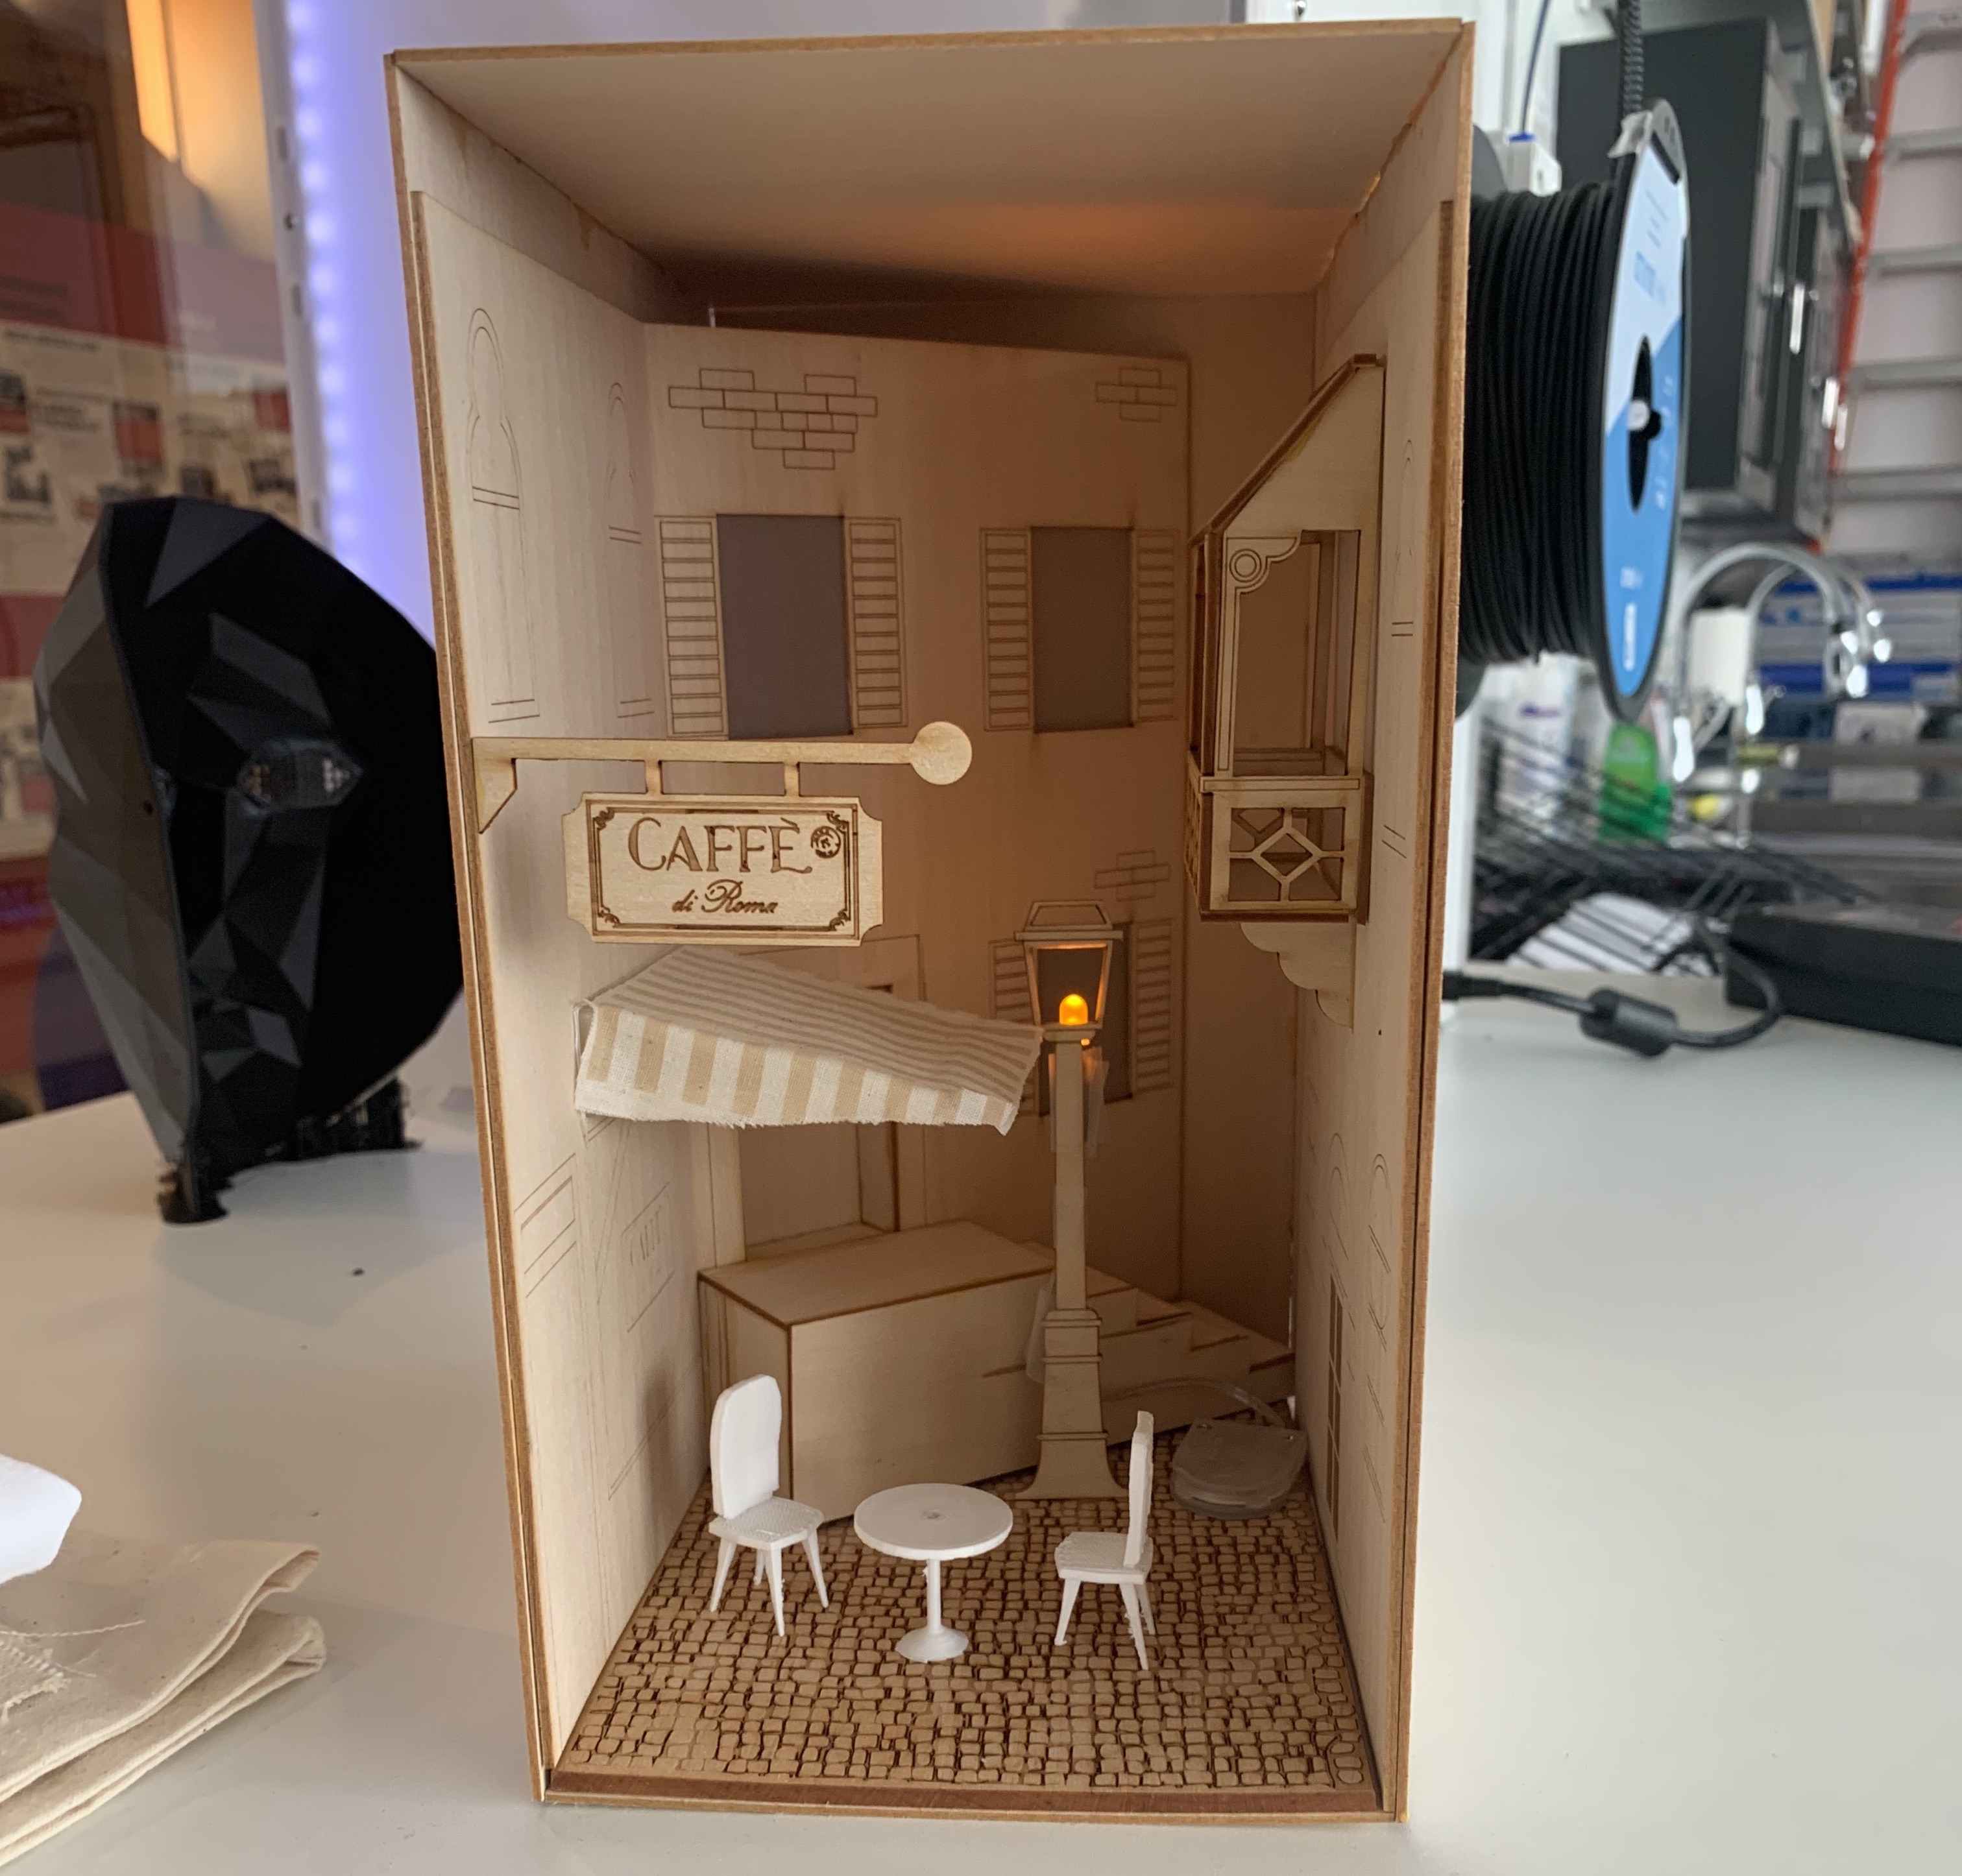 Wooden lasercut replica of an alley in a Eurpoean style. Within the replica is a sign that says cafe, 3D printed mini chairs and table, and windows.